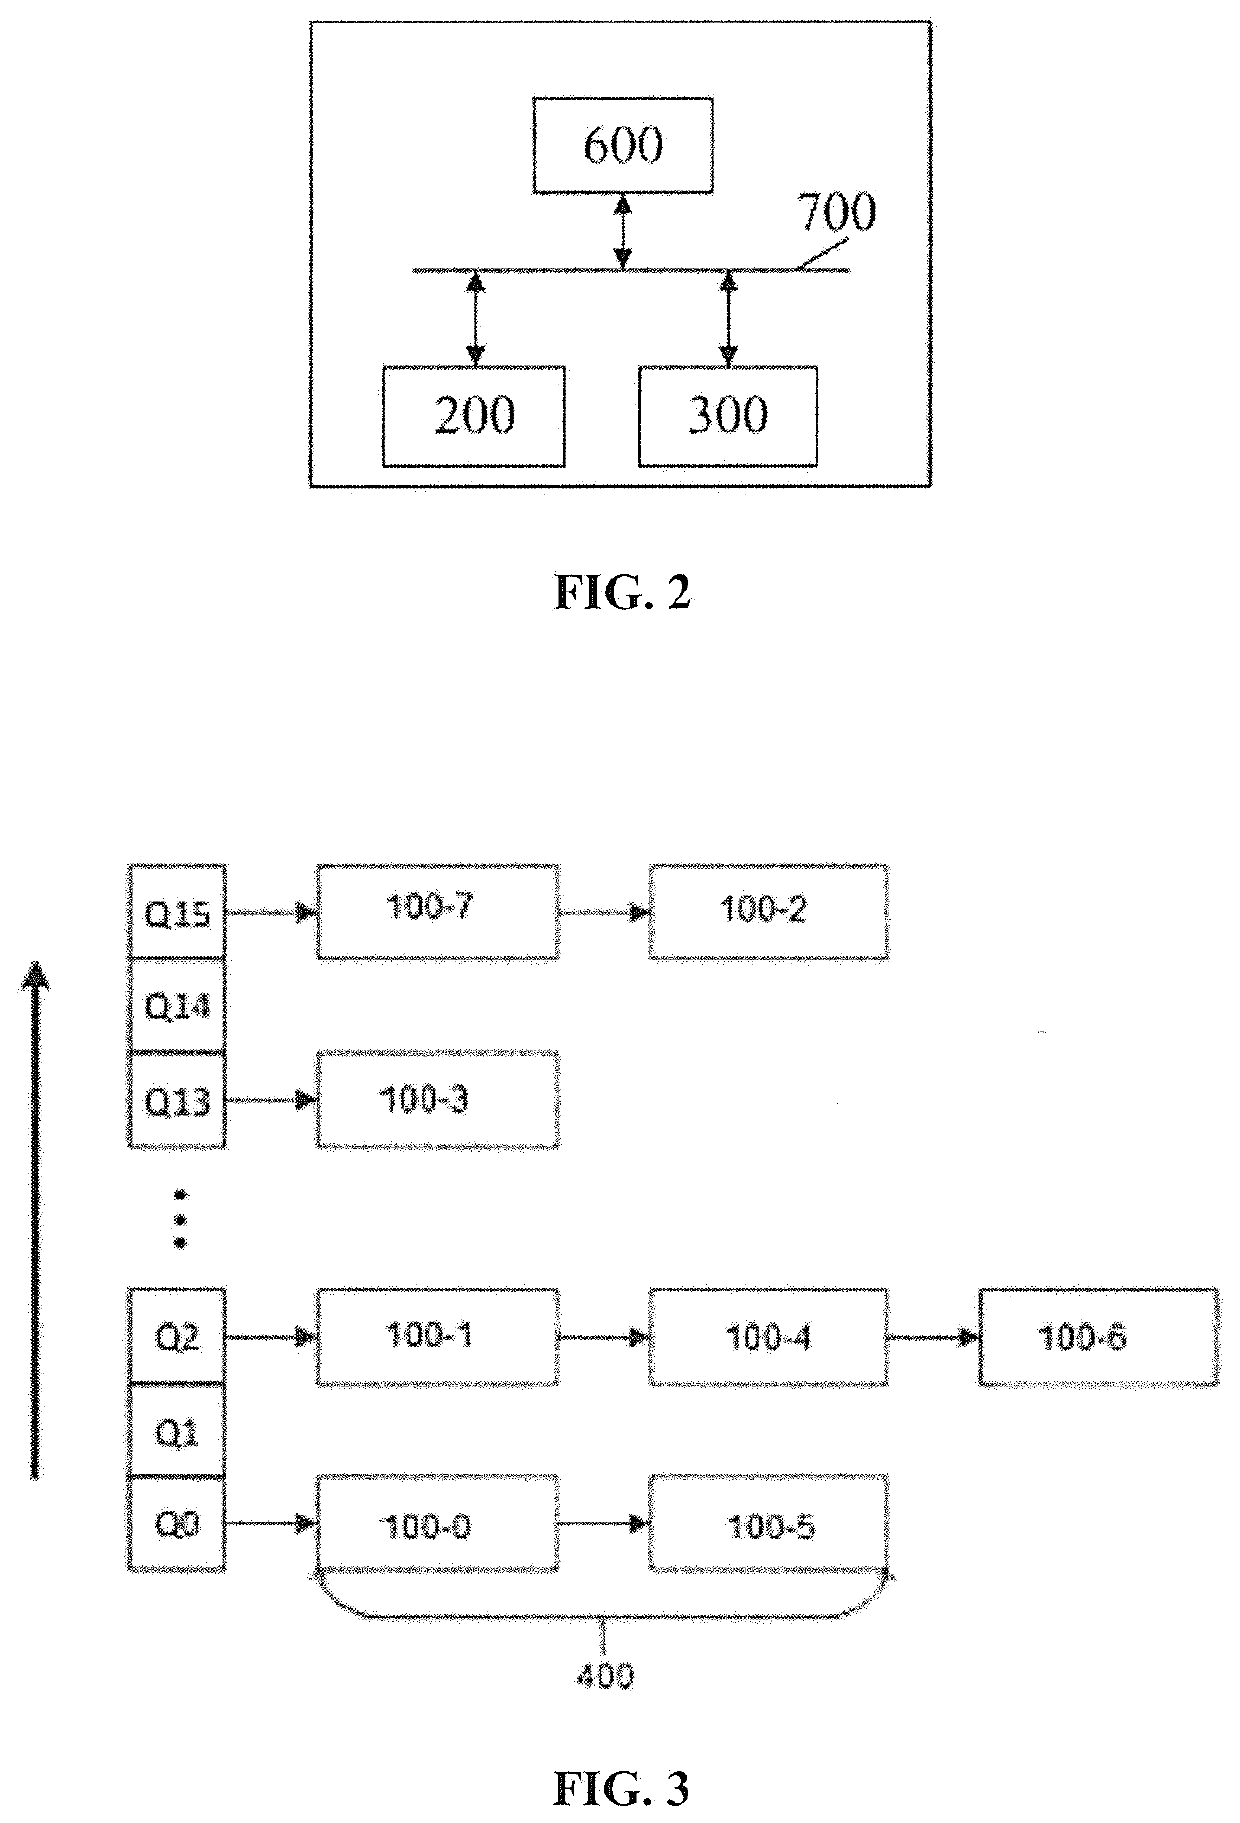 SCALABLE In-MEMORY OBJECT STORAGE SYSTEM USING HYBRID MEMORY DEVICES